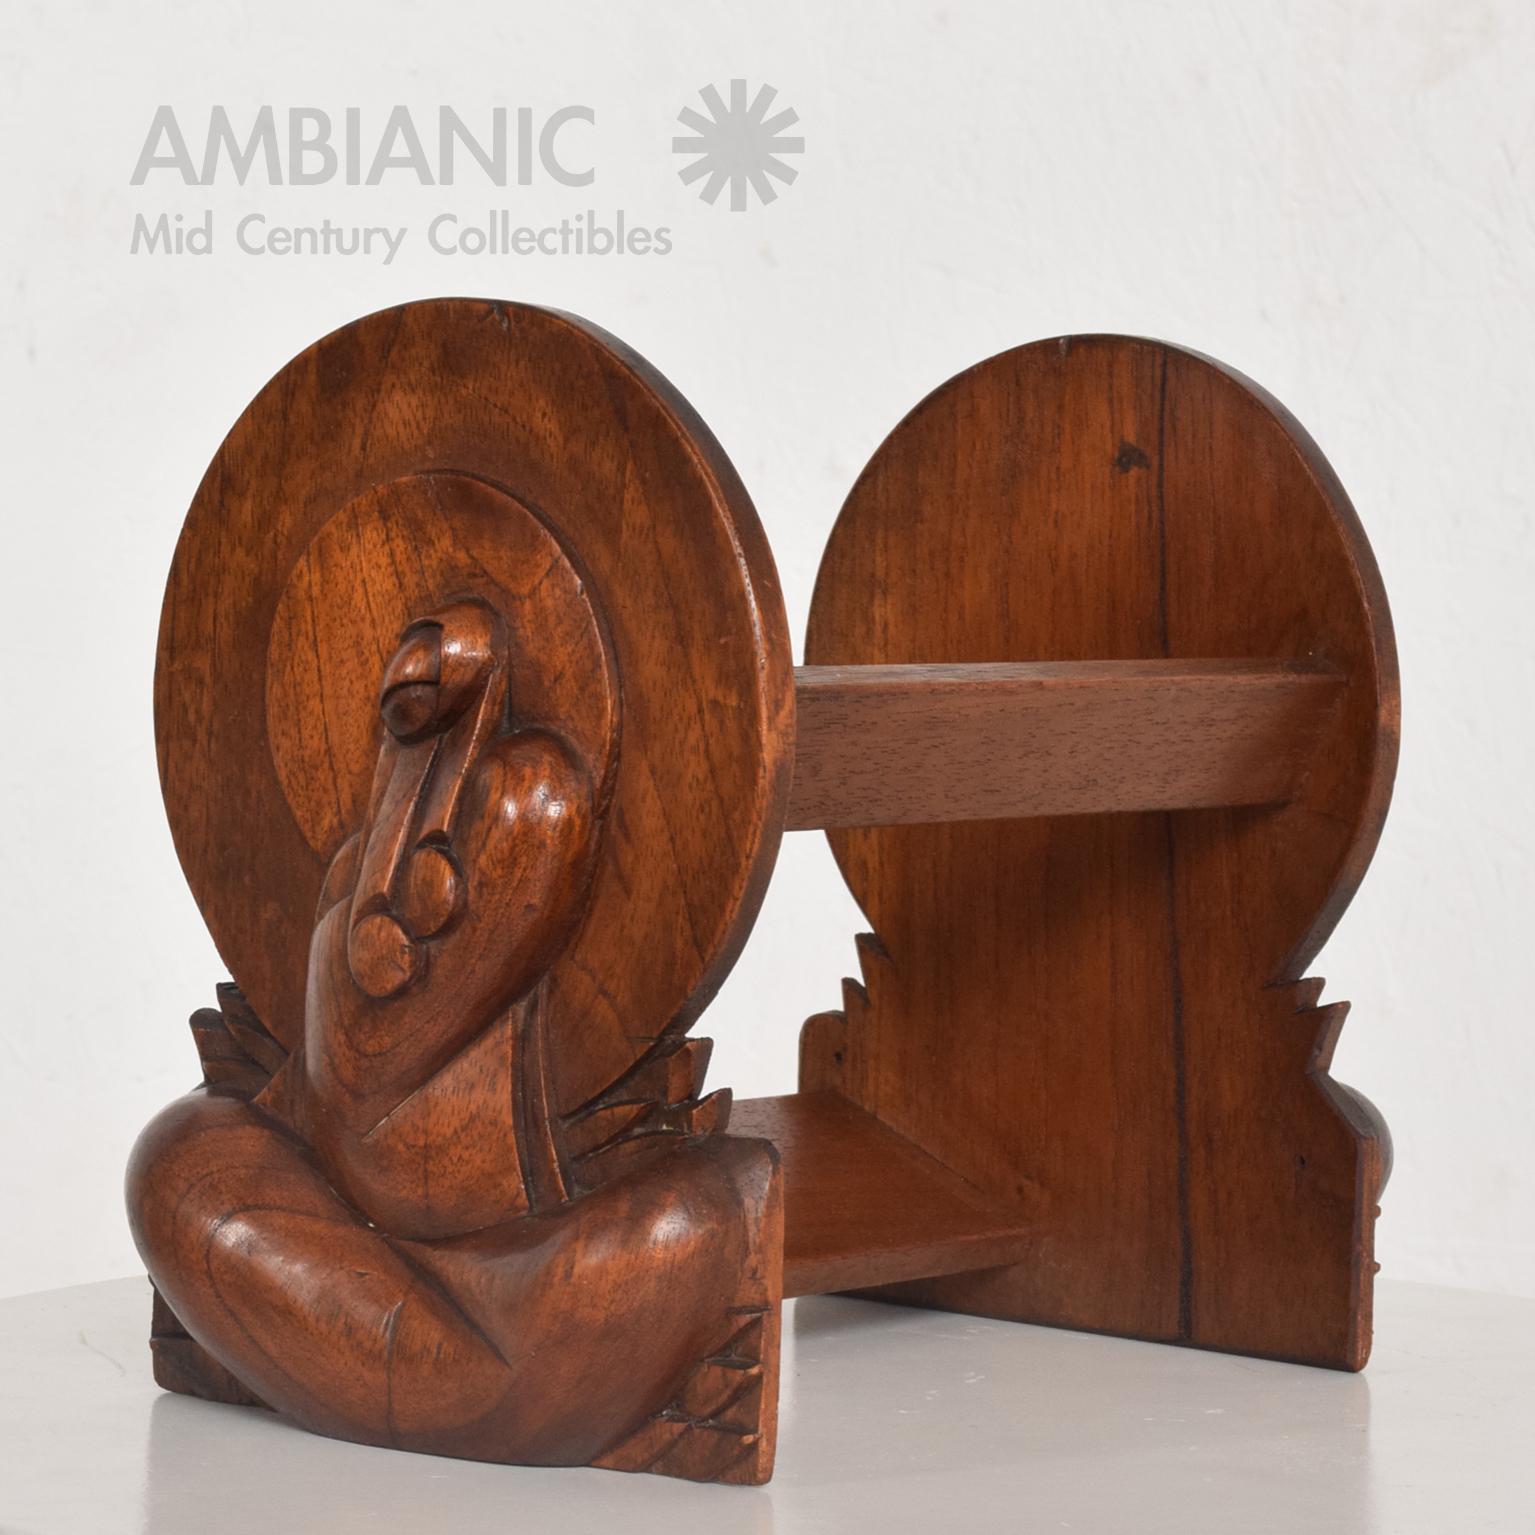 Mid-20th Century Pair of Art Deco Bookends in Solid Mahogany Wood